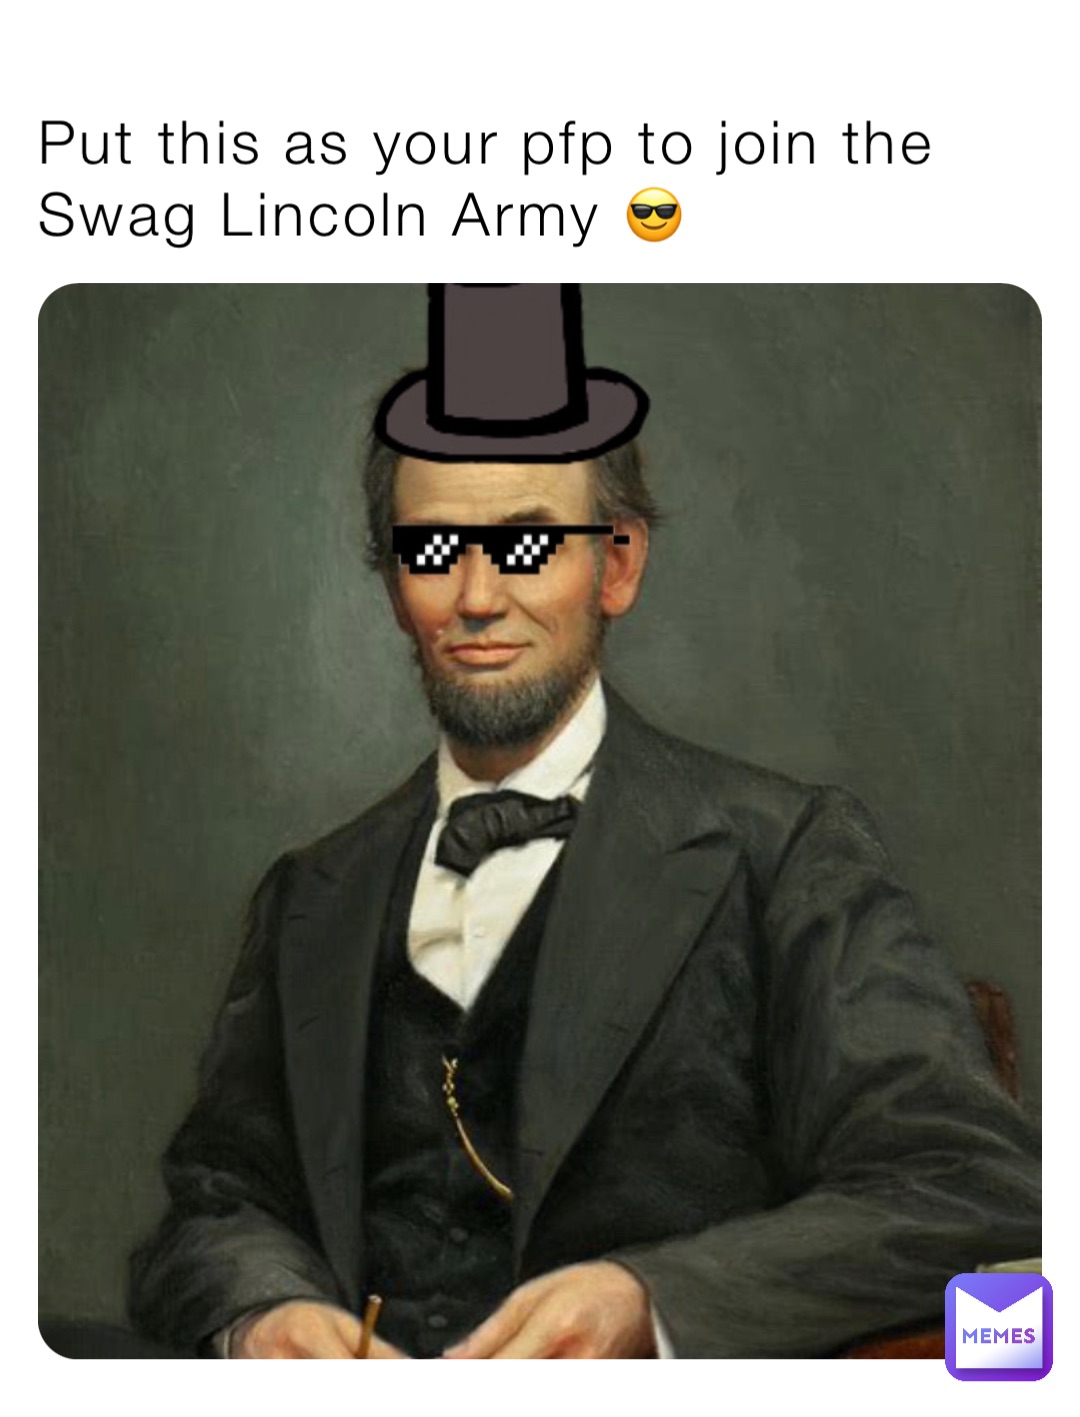 Put this as your pfp to join the Swag Lincoln Army 😎